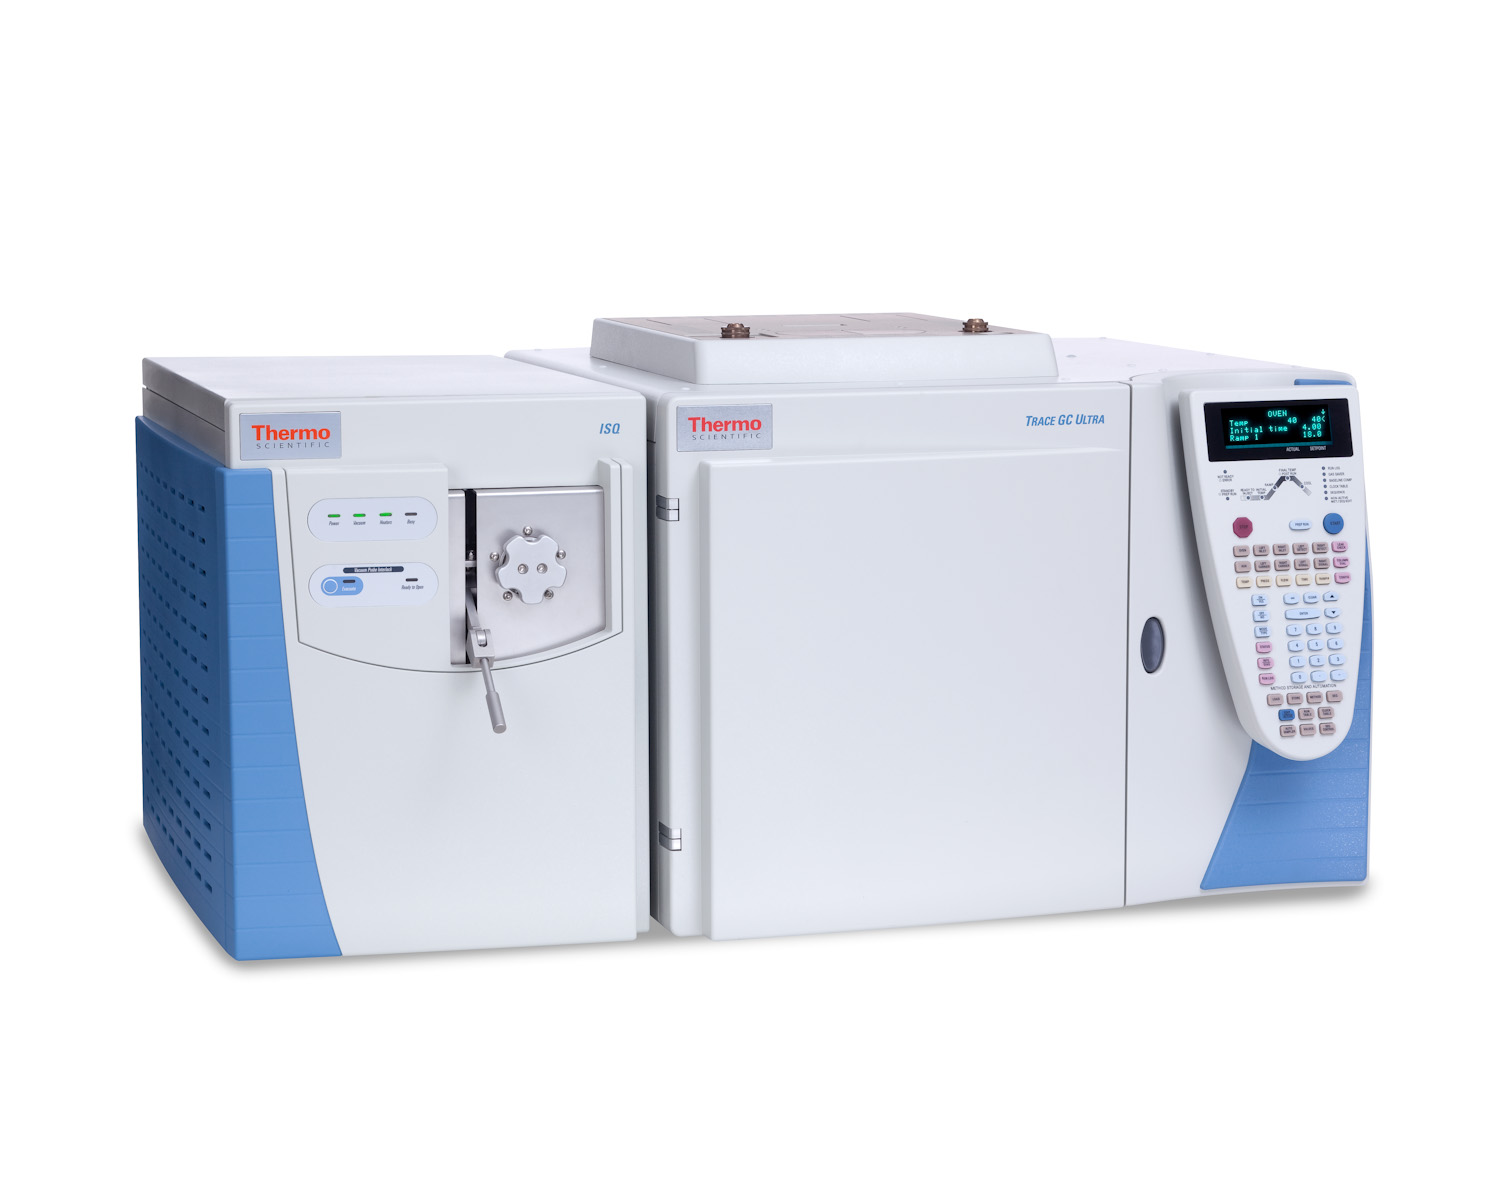 Thermo Fisher Scientific Launches New Single Quadrupole GC-MS with Removable Ion Source at Analytica 2010